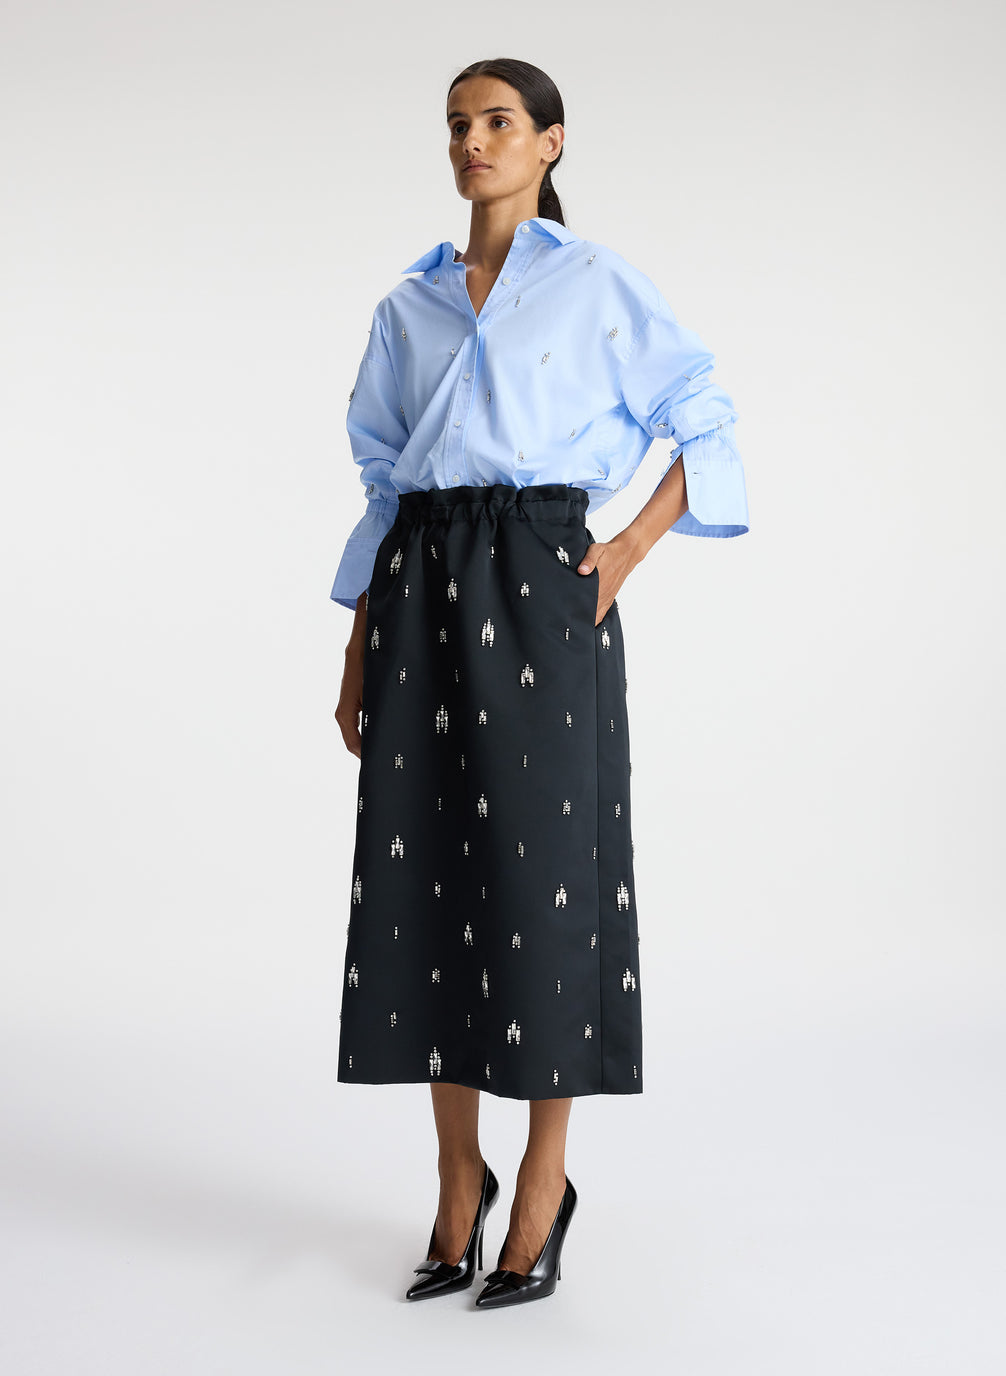 side view of woman wearing blue embellished button down top and black embellished midi skirt